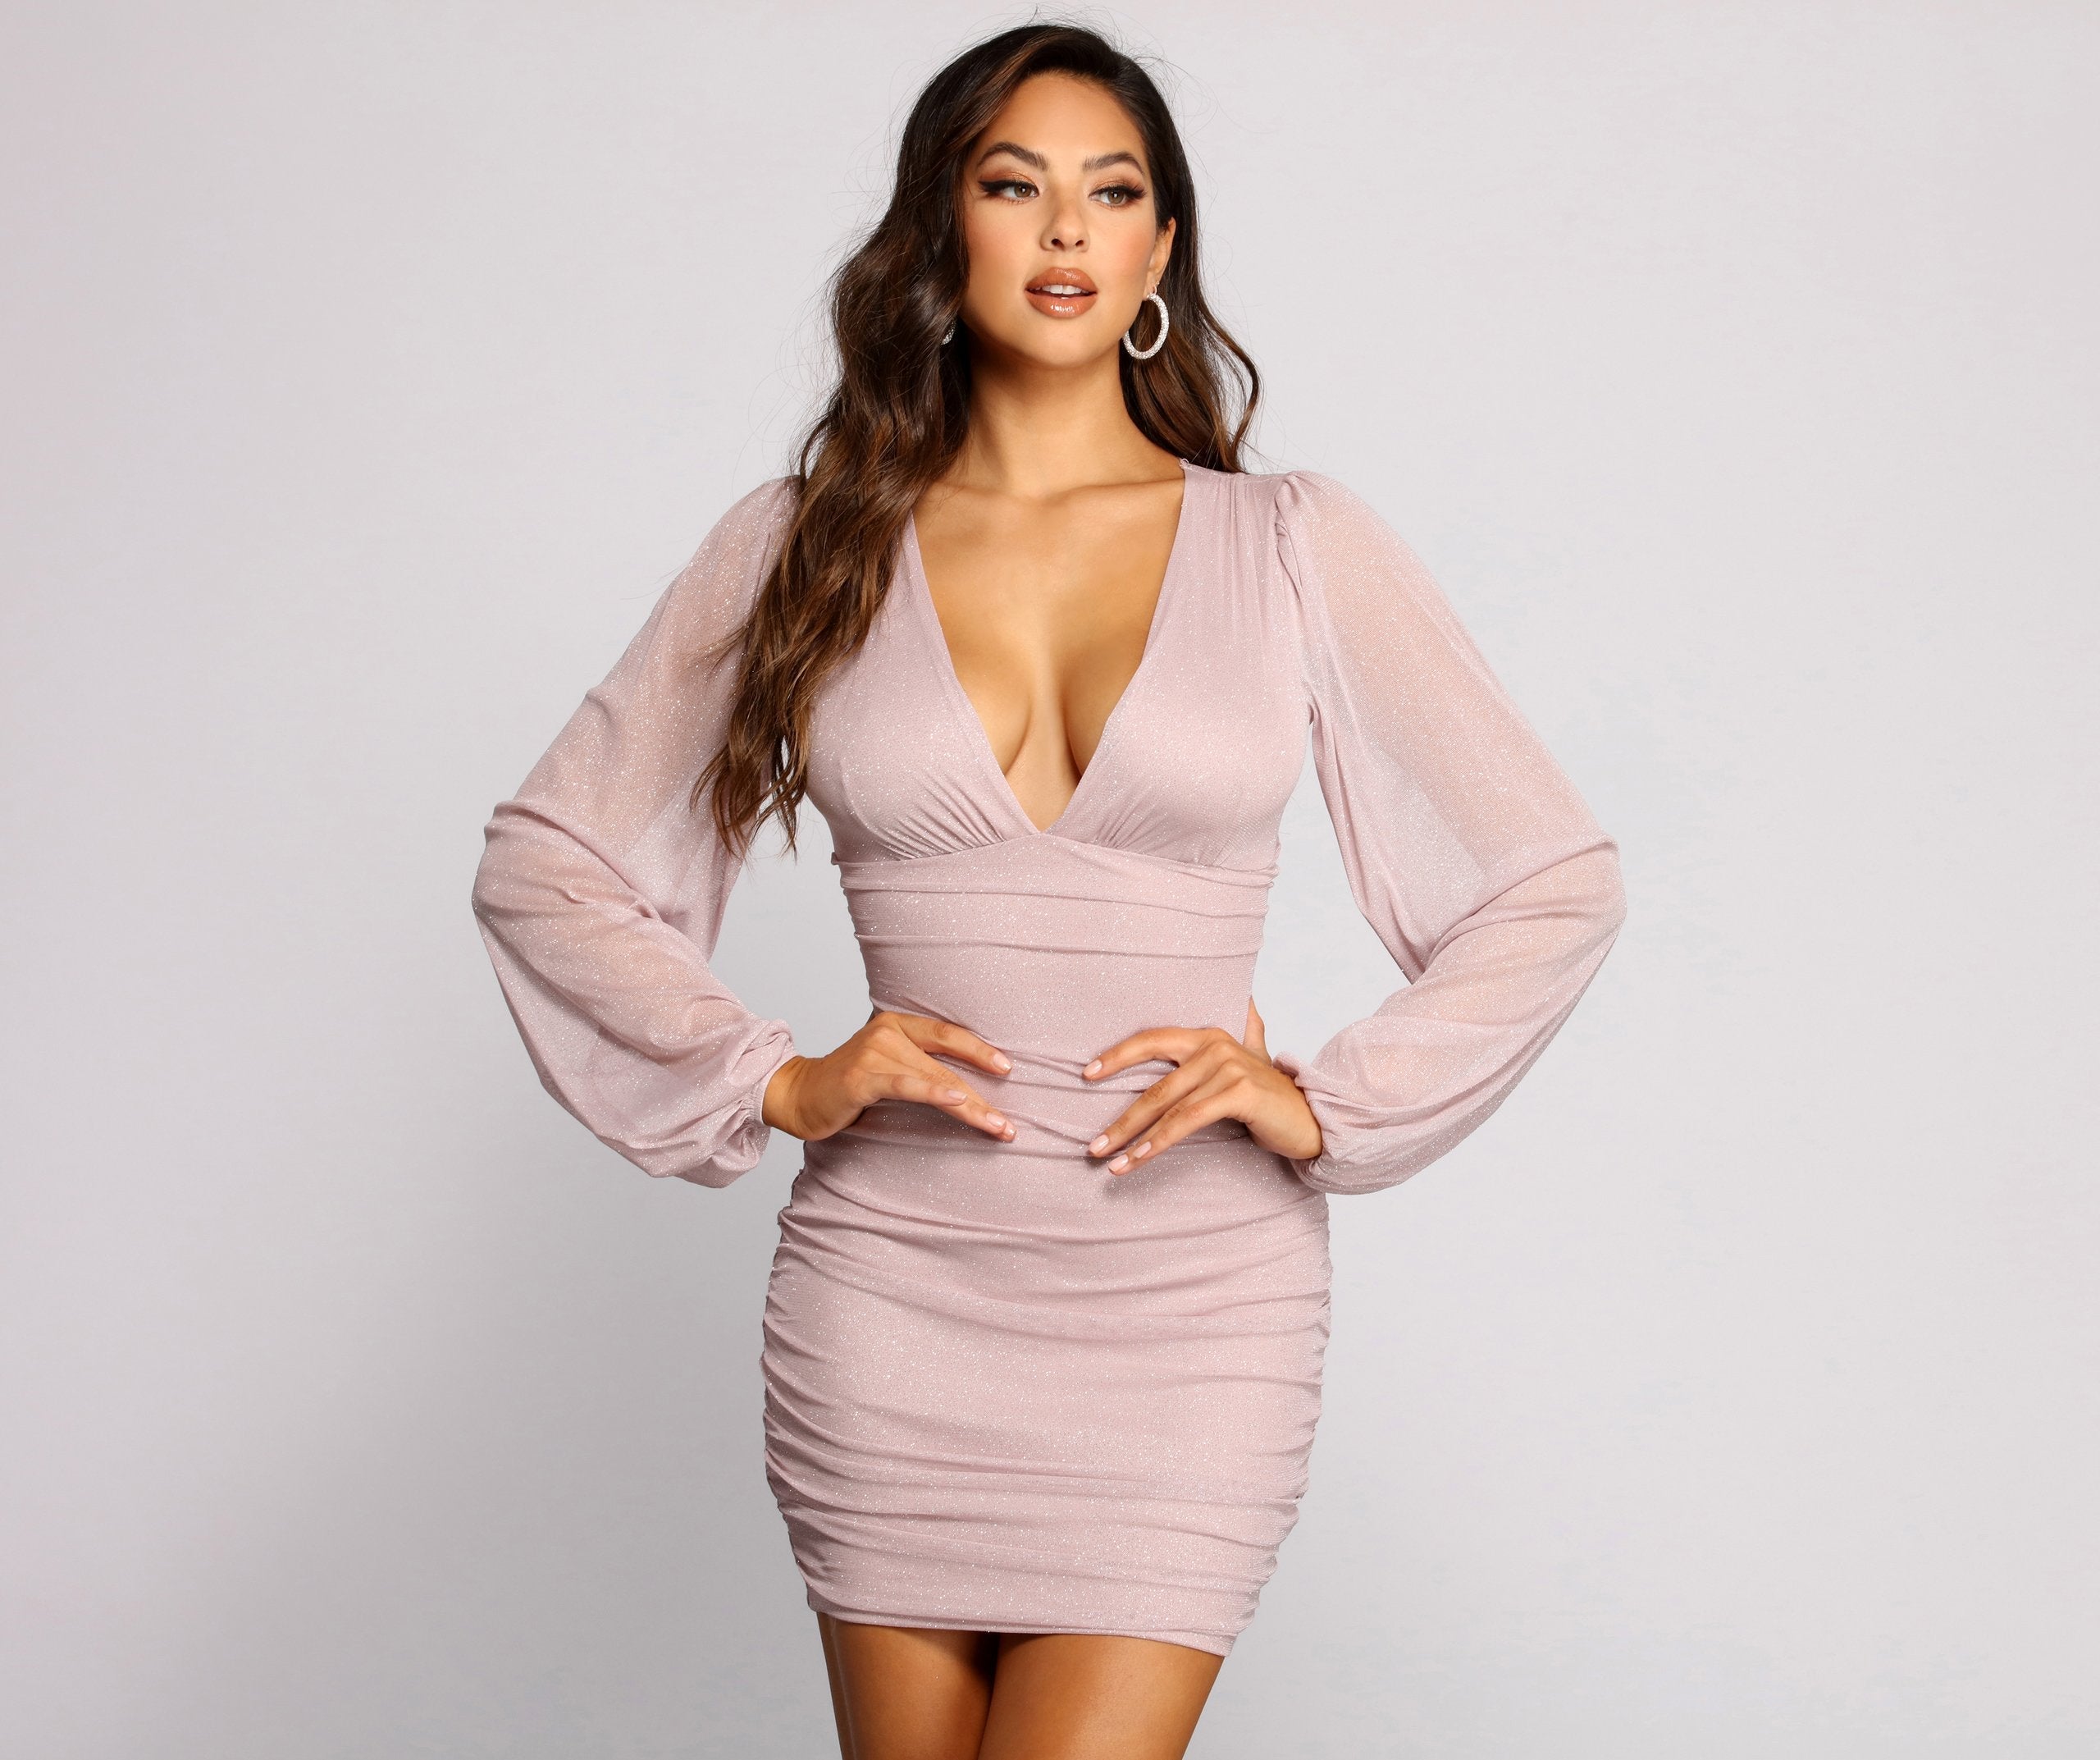 All About The Glitz Mesh Mini Dress - Lady Occasions